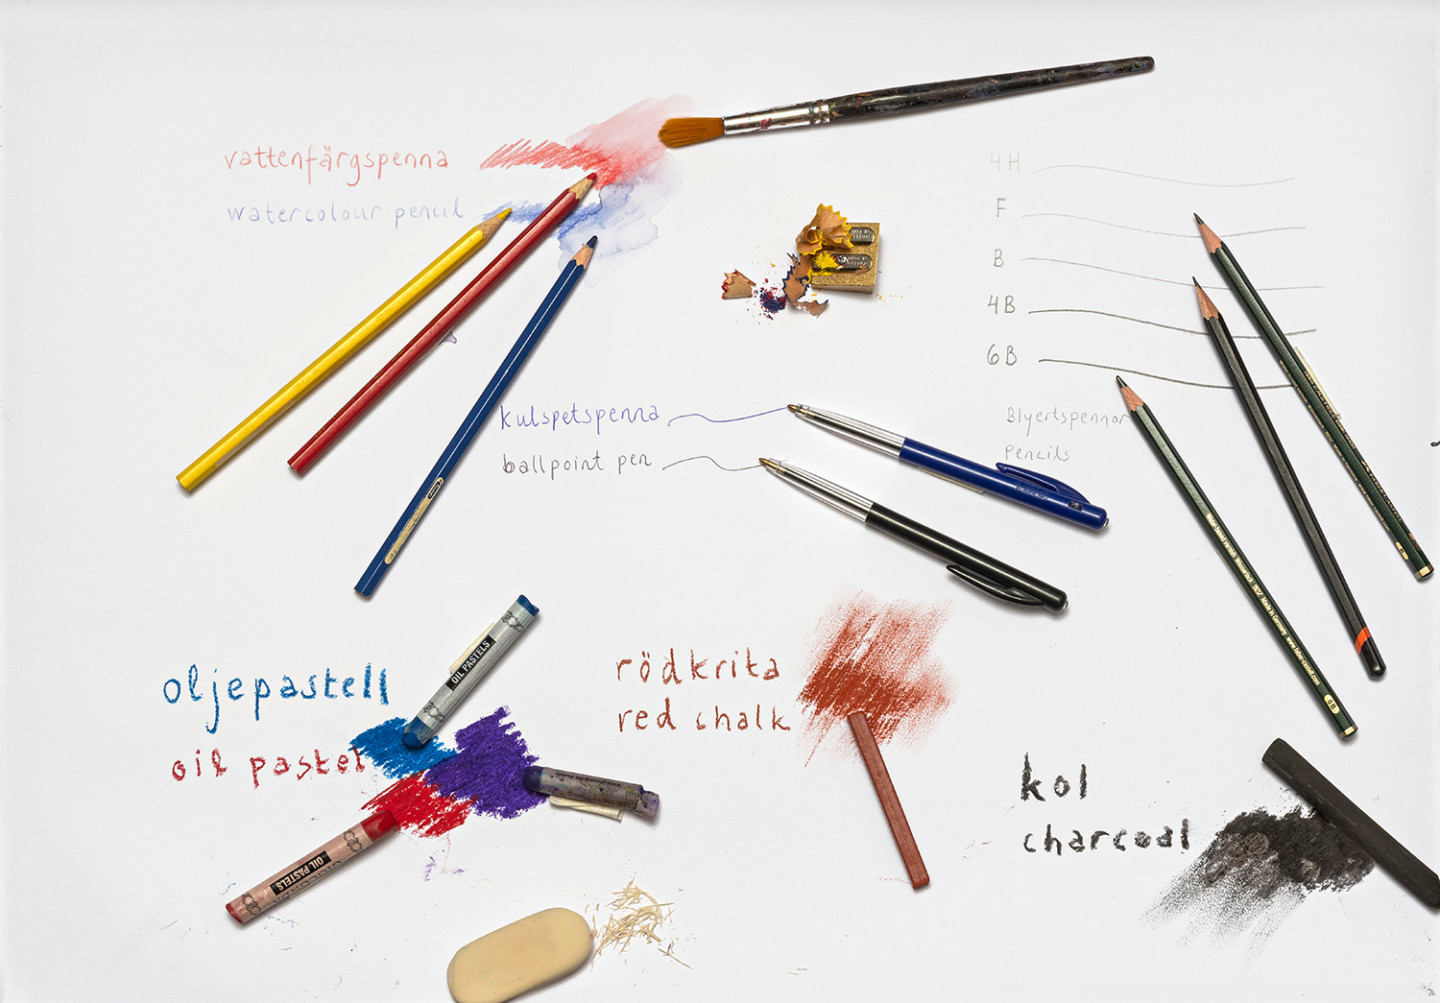 Different types of pencils and crayons: watercolour pencil, ballpoint pen, charcoal, red chalk, oil pastel and pencil. 